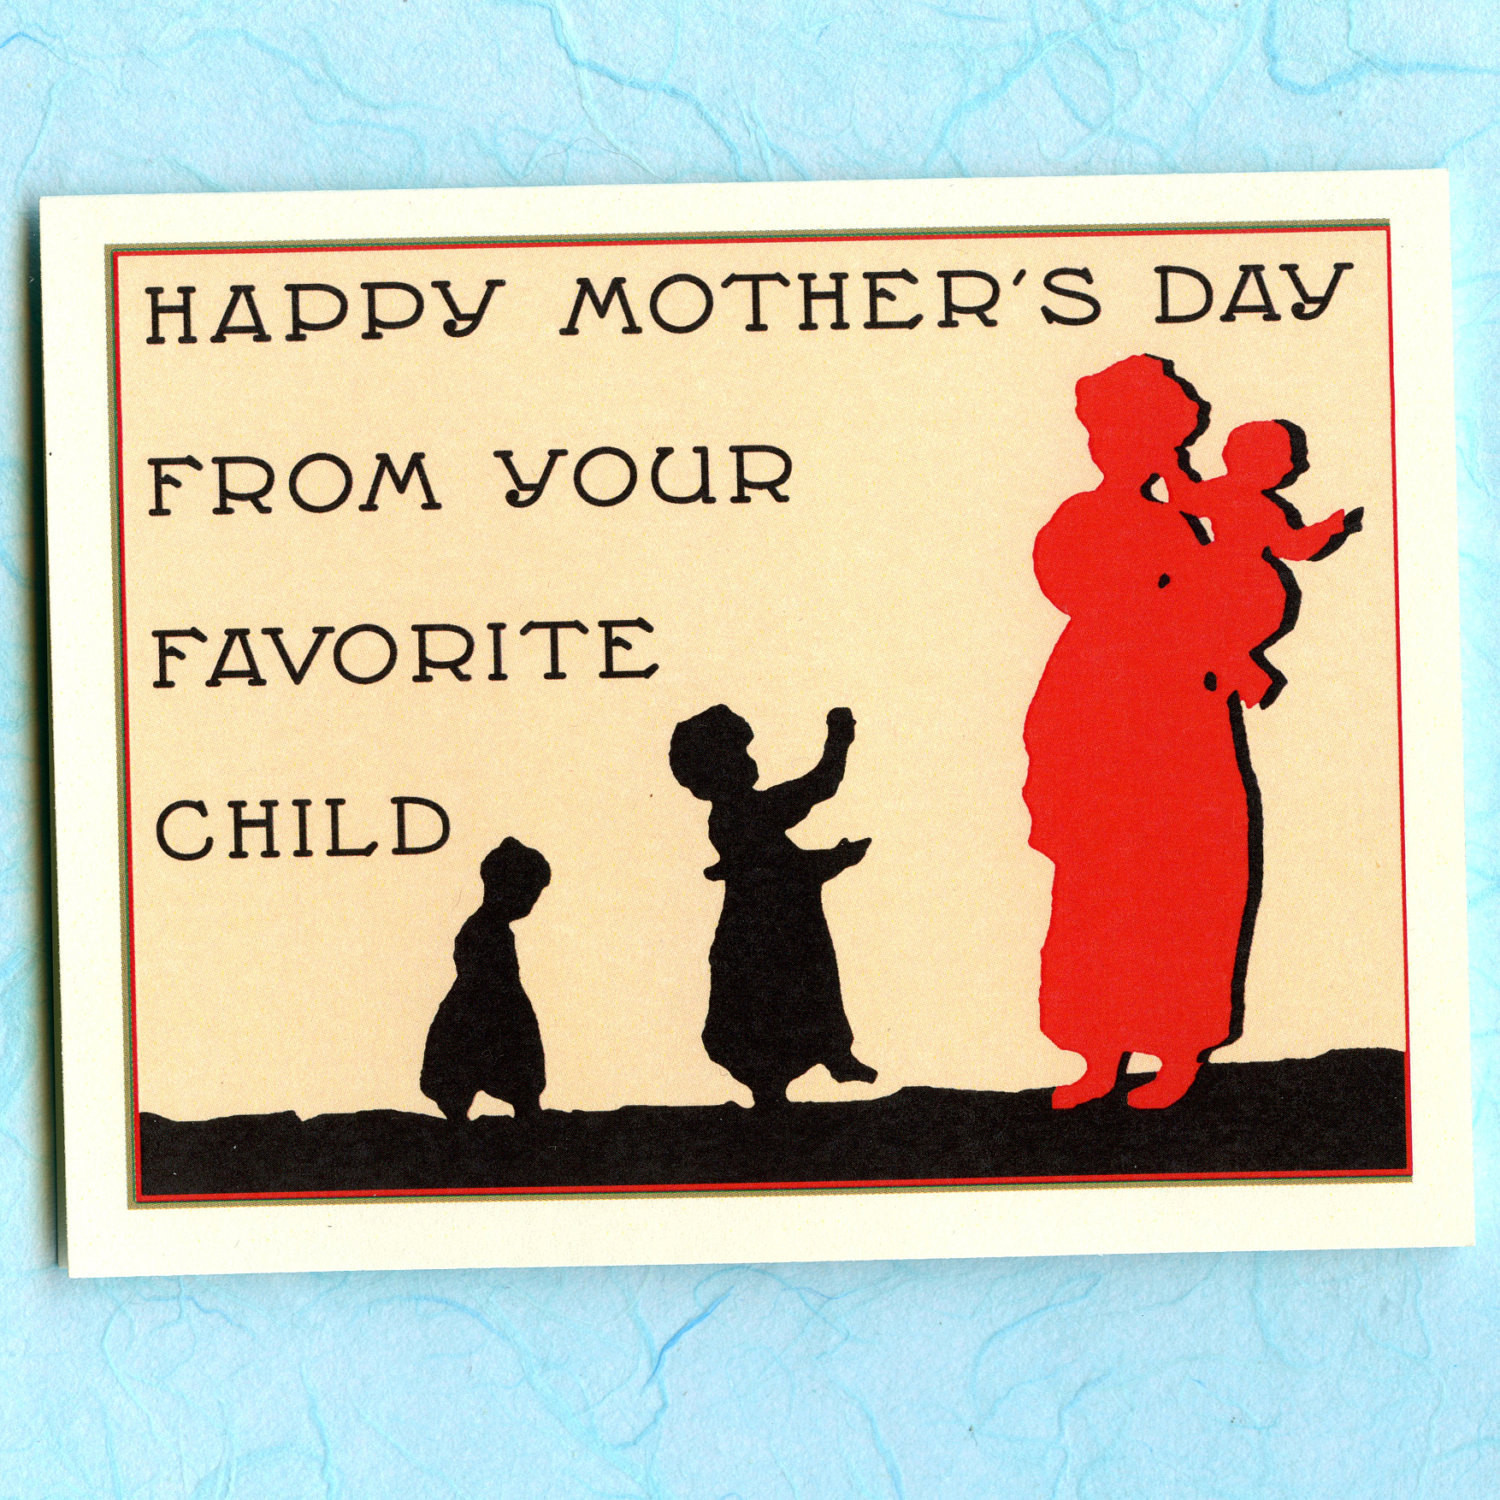 Mothers Funny Quotes
 Funny Quotes About Mothers Day QuotesGram